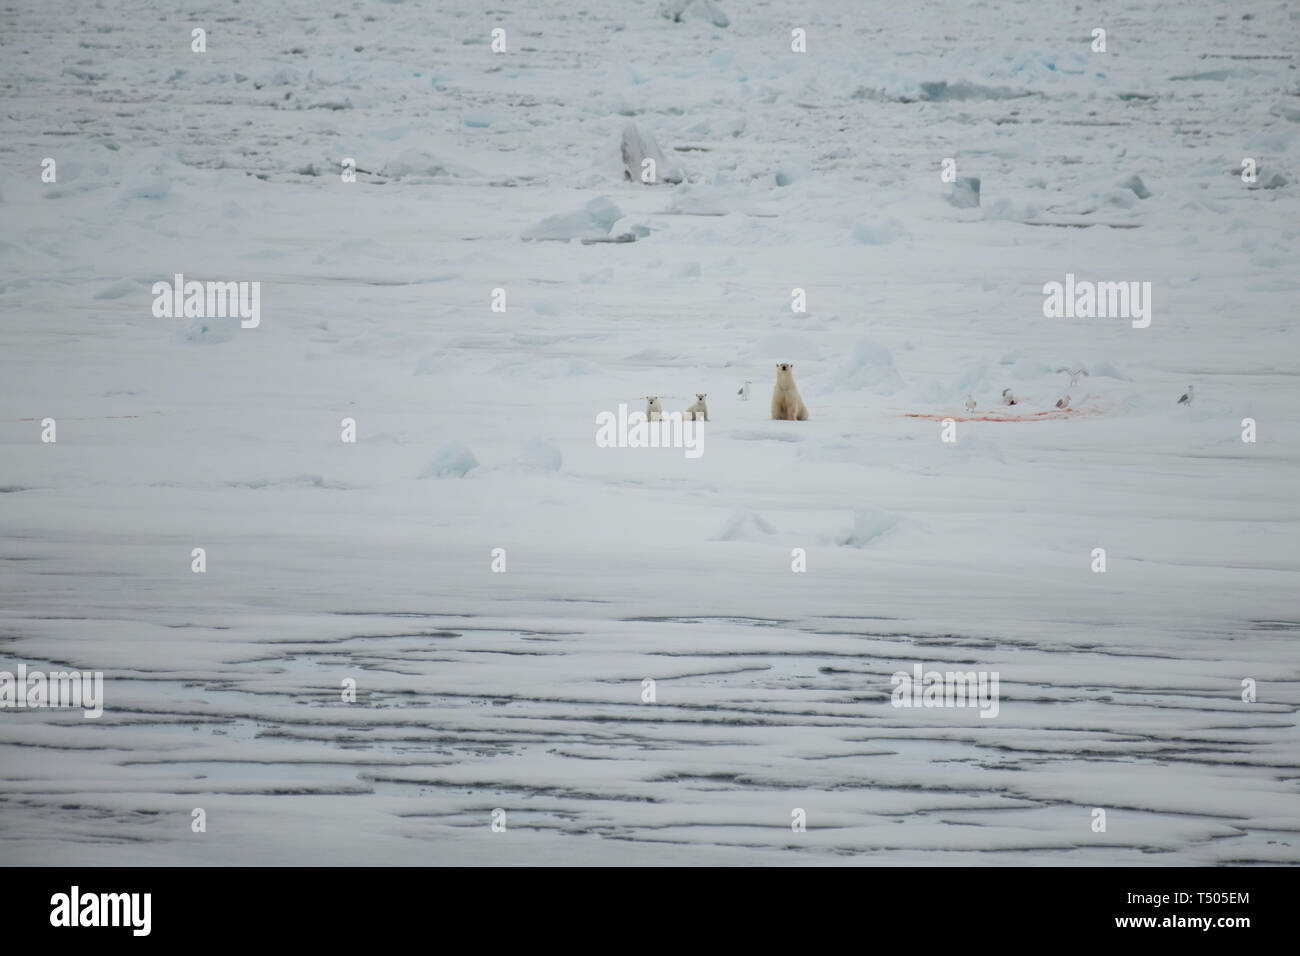 Polar bear with two cubs walking in an arctic landscape. Stock Photo